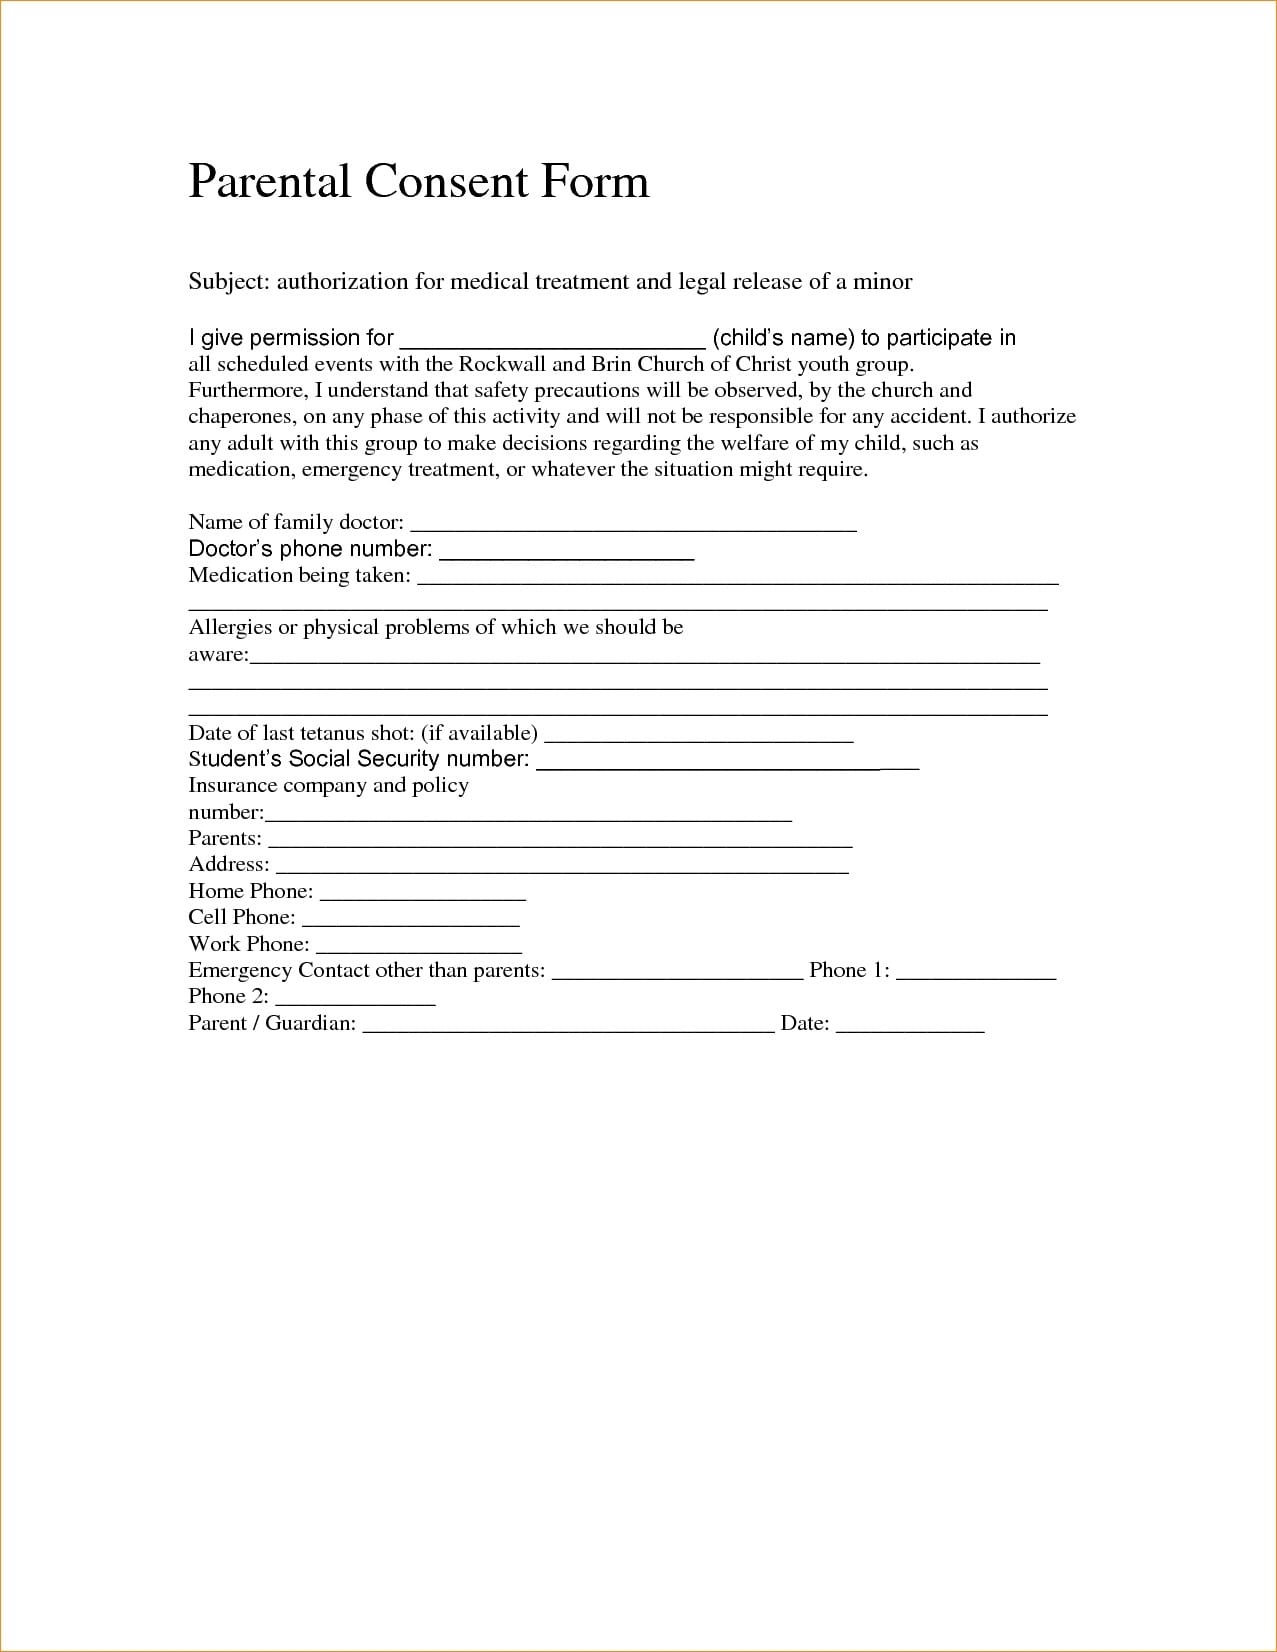 parental medical authorization letter example